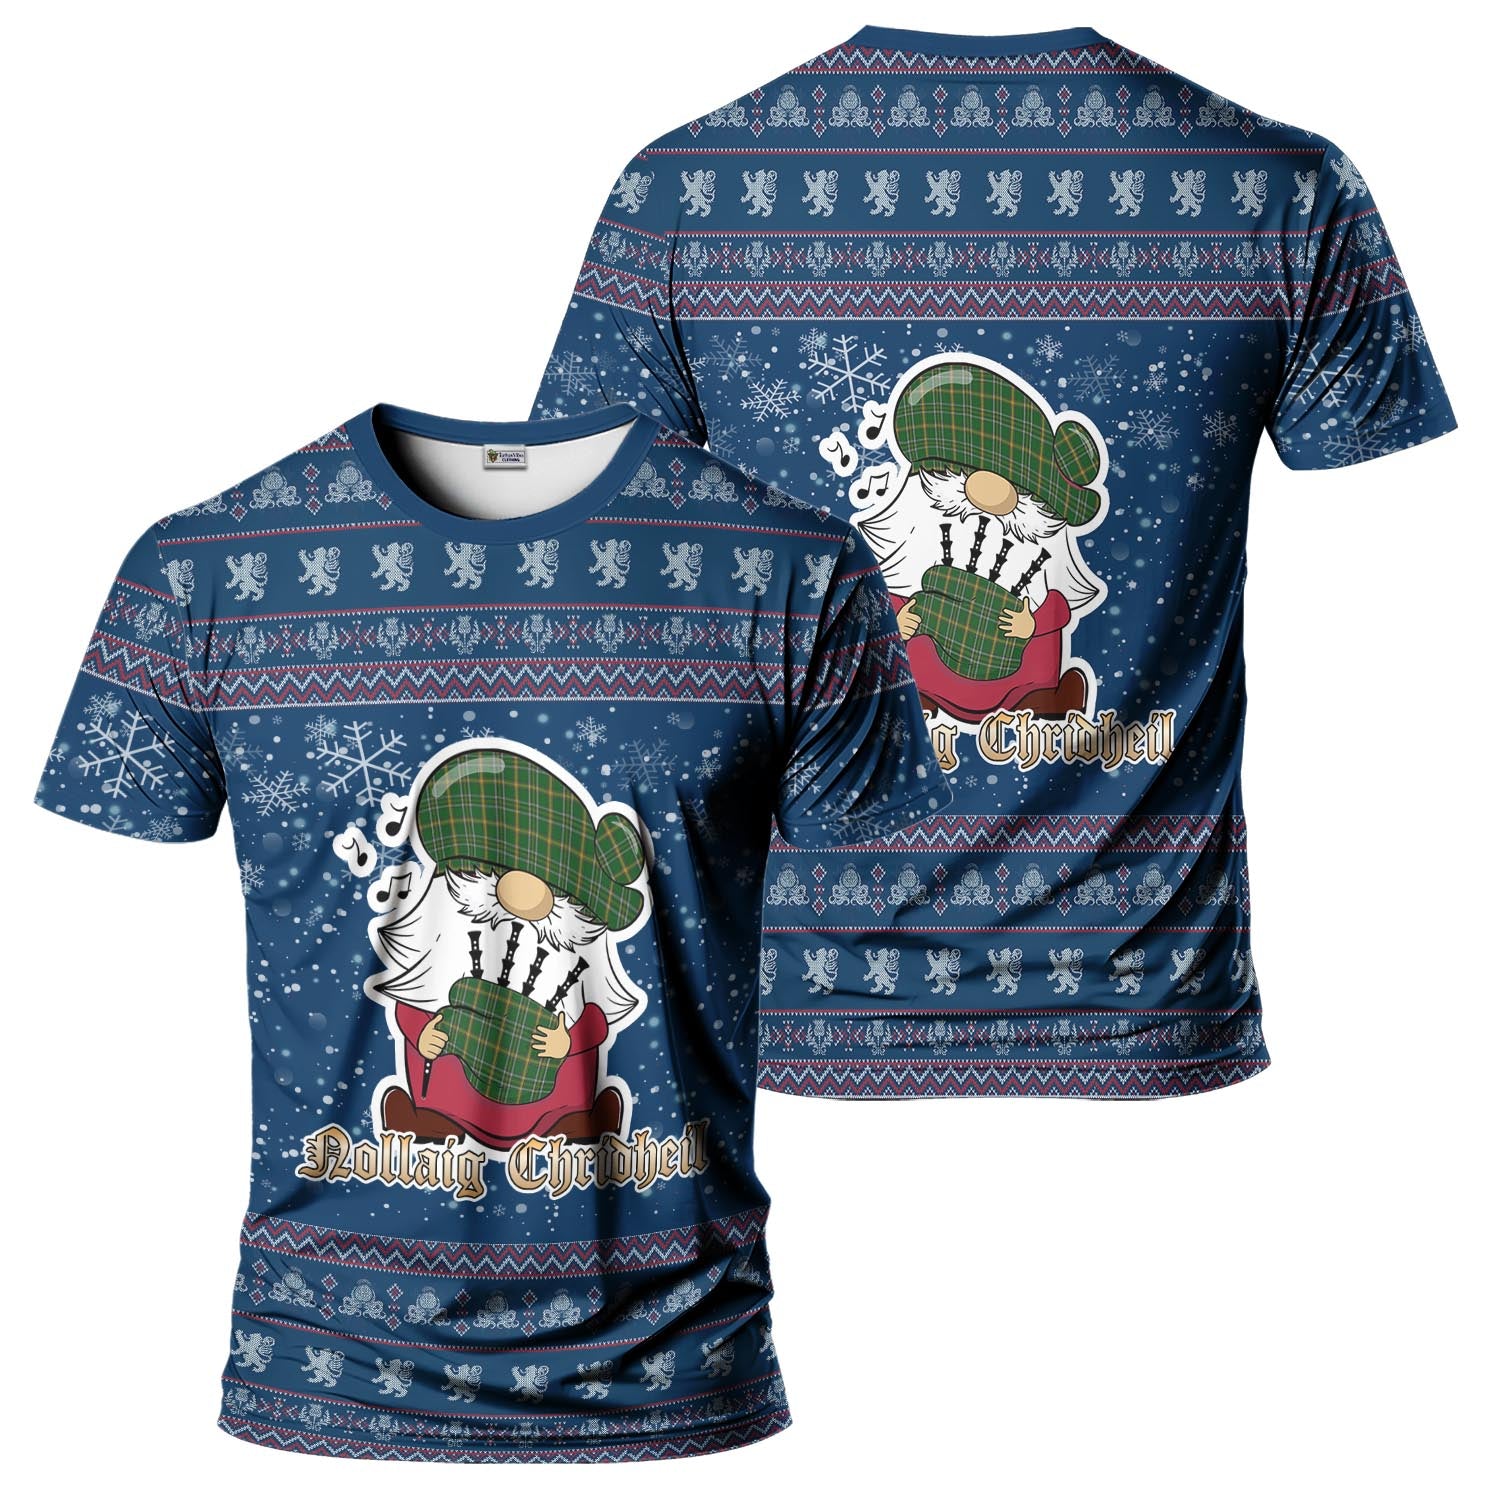 Offaly County Ireland Clan Christmas Family T-Shirt with Funny Gnome Playing Bagpipes Kid's Shirt Blue - Tartanvibesclothing